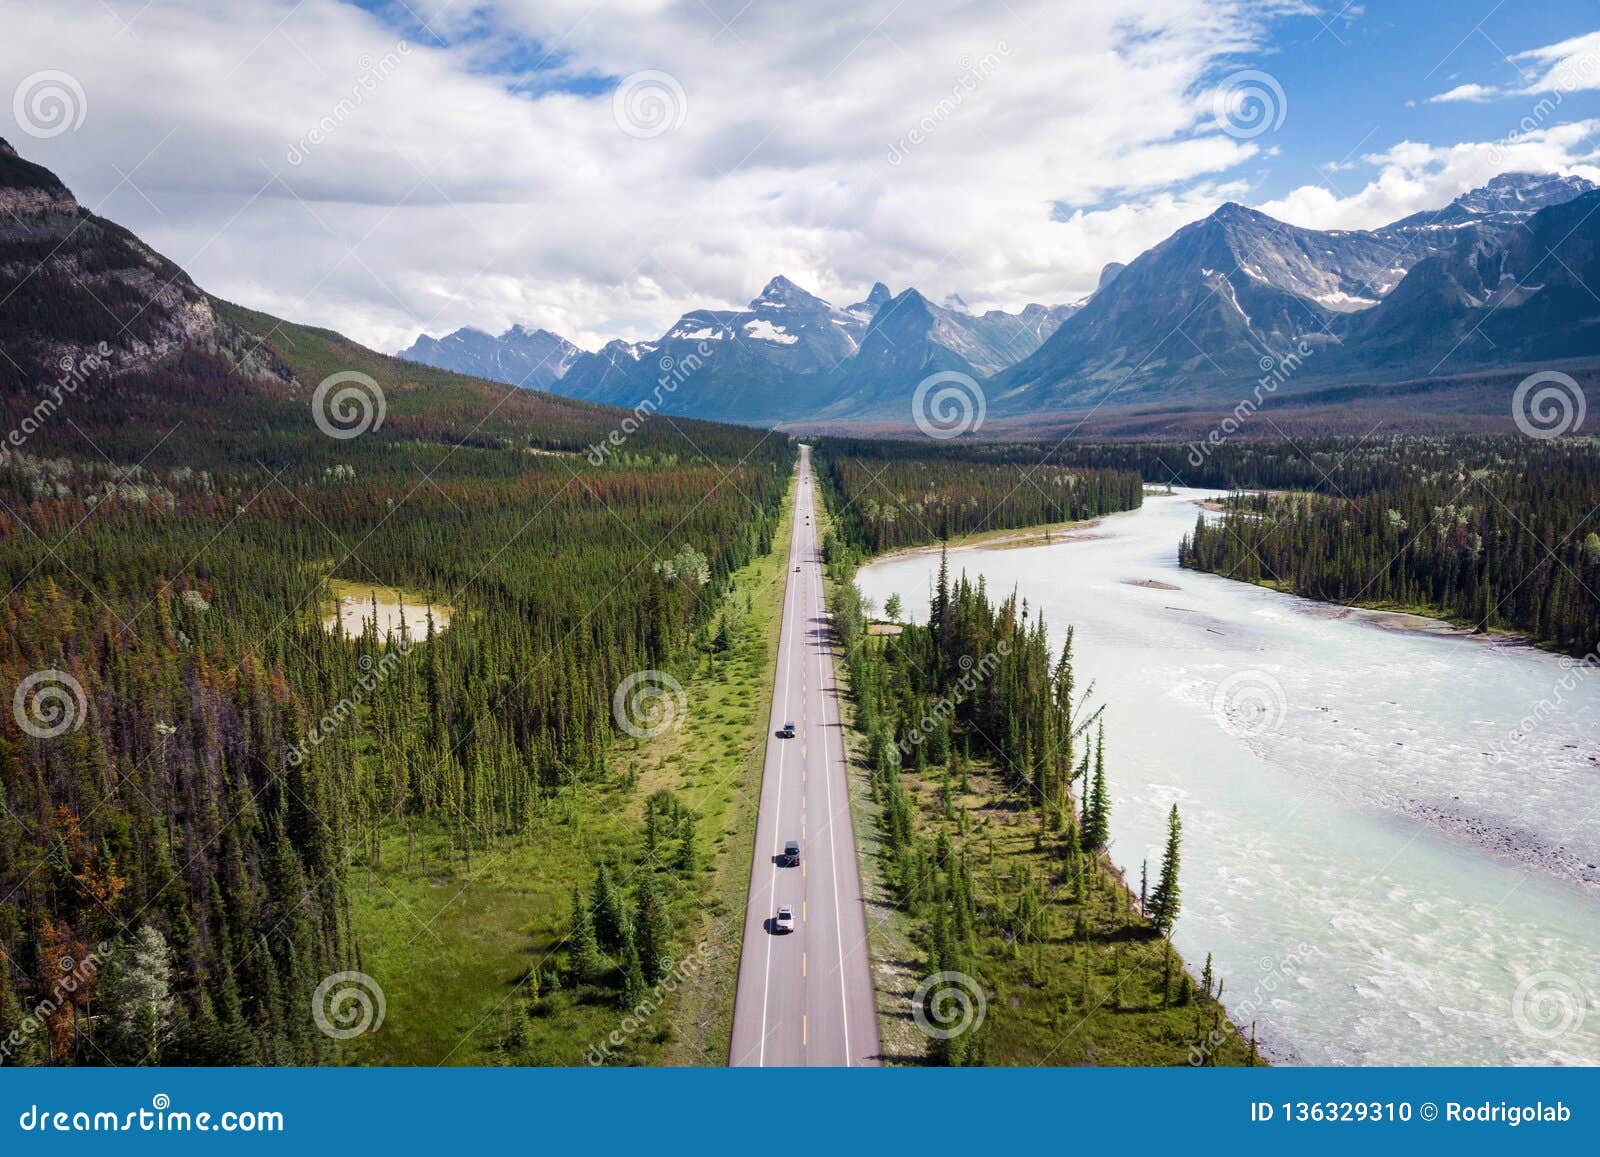 aerial view of icefields parkway route between banff and jasper in alberta, canada